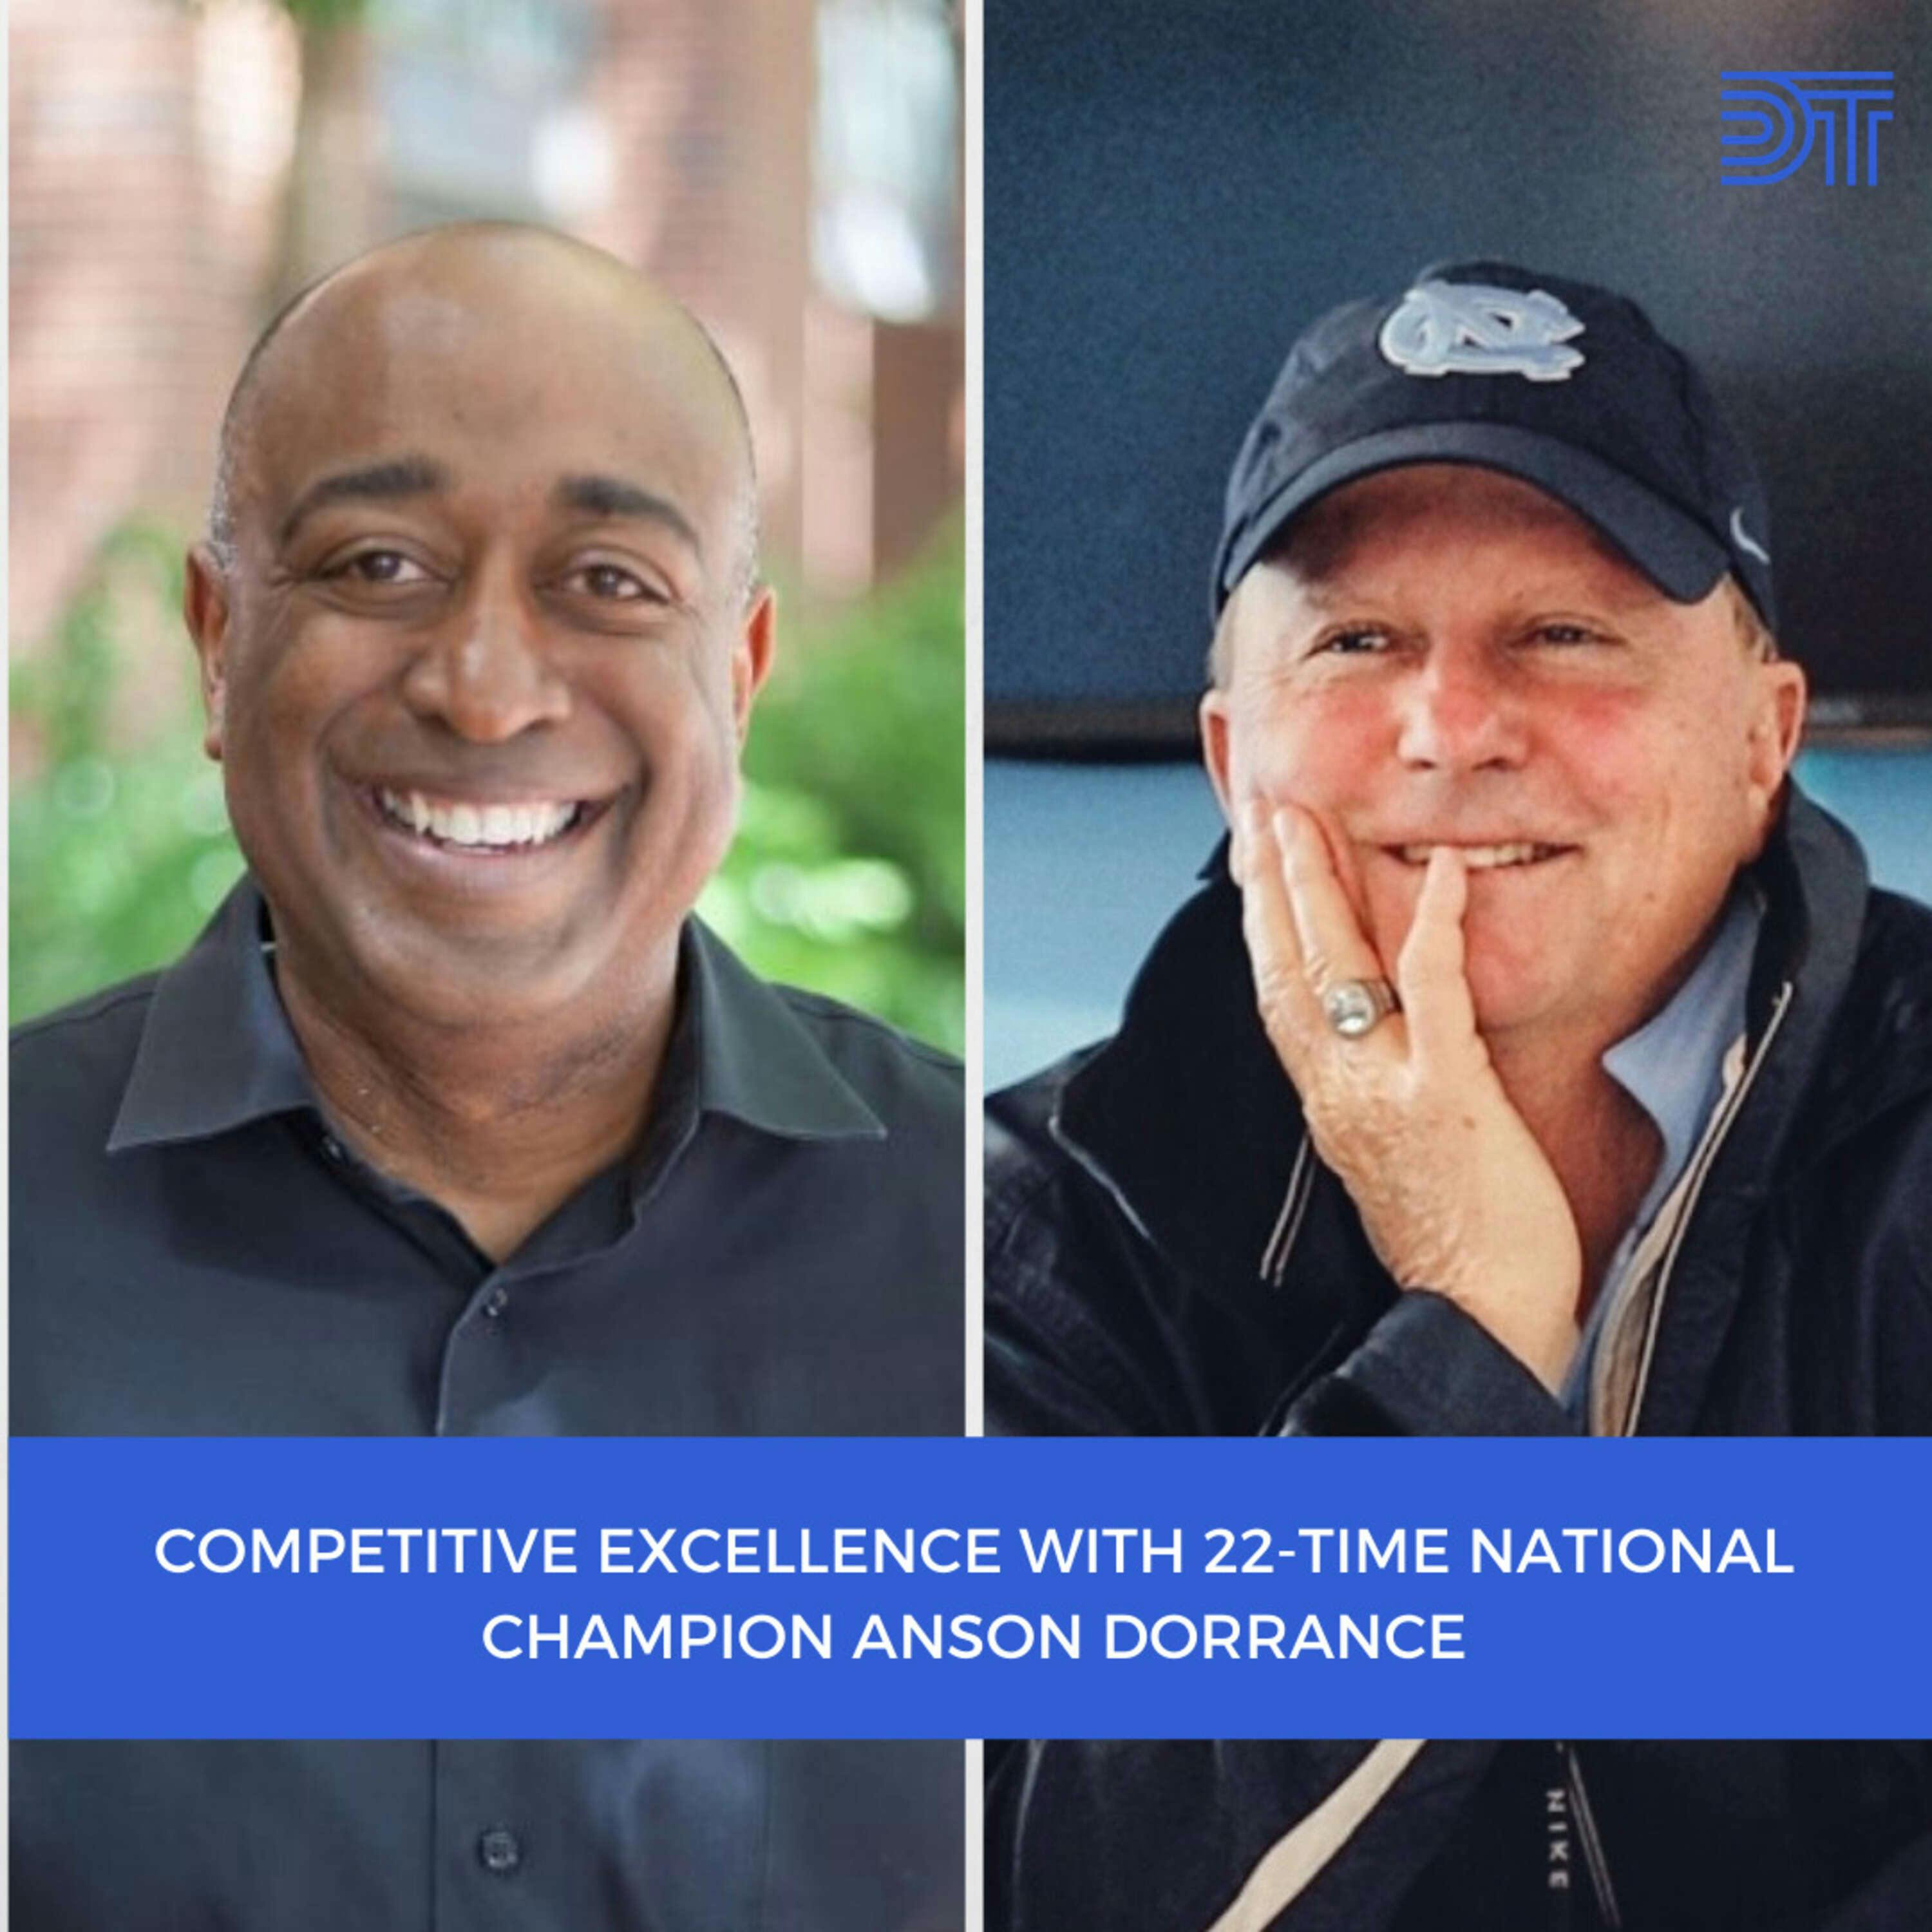 Competitive Excellence with 22-Time National Champion Anson Dorrance